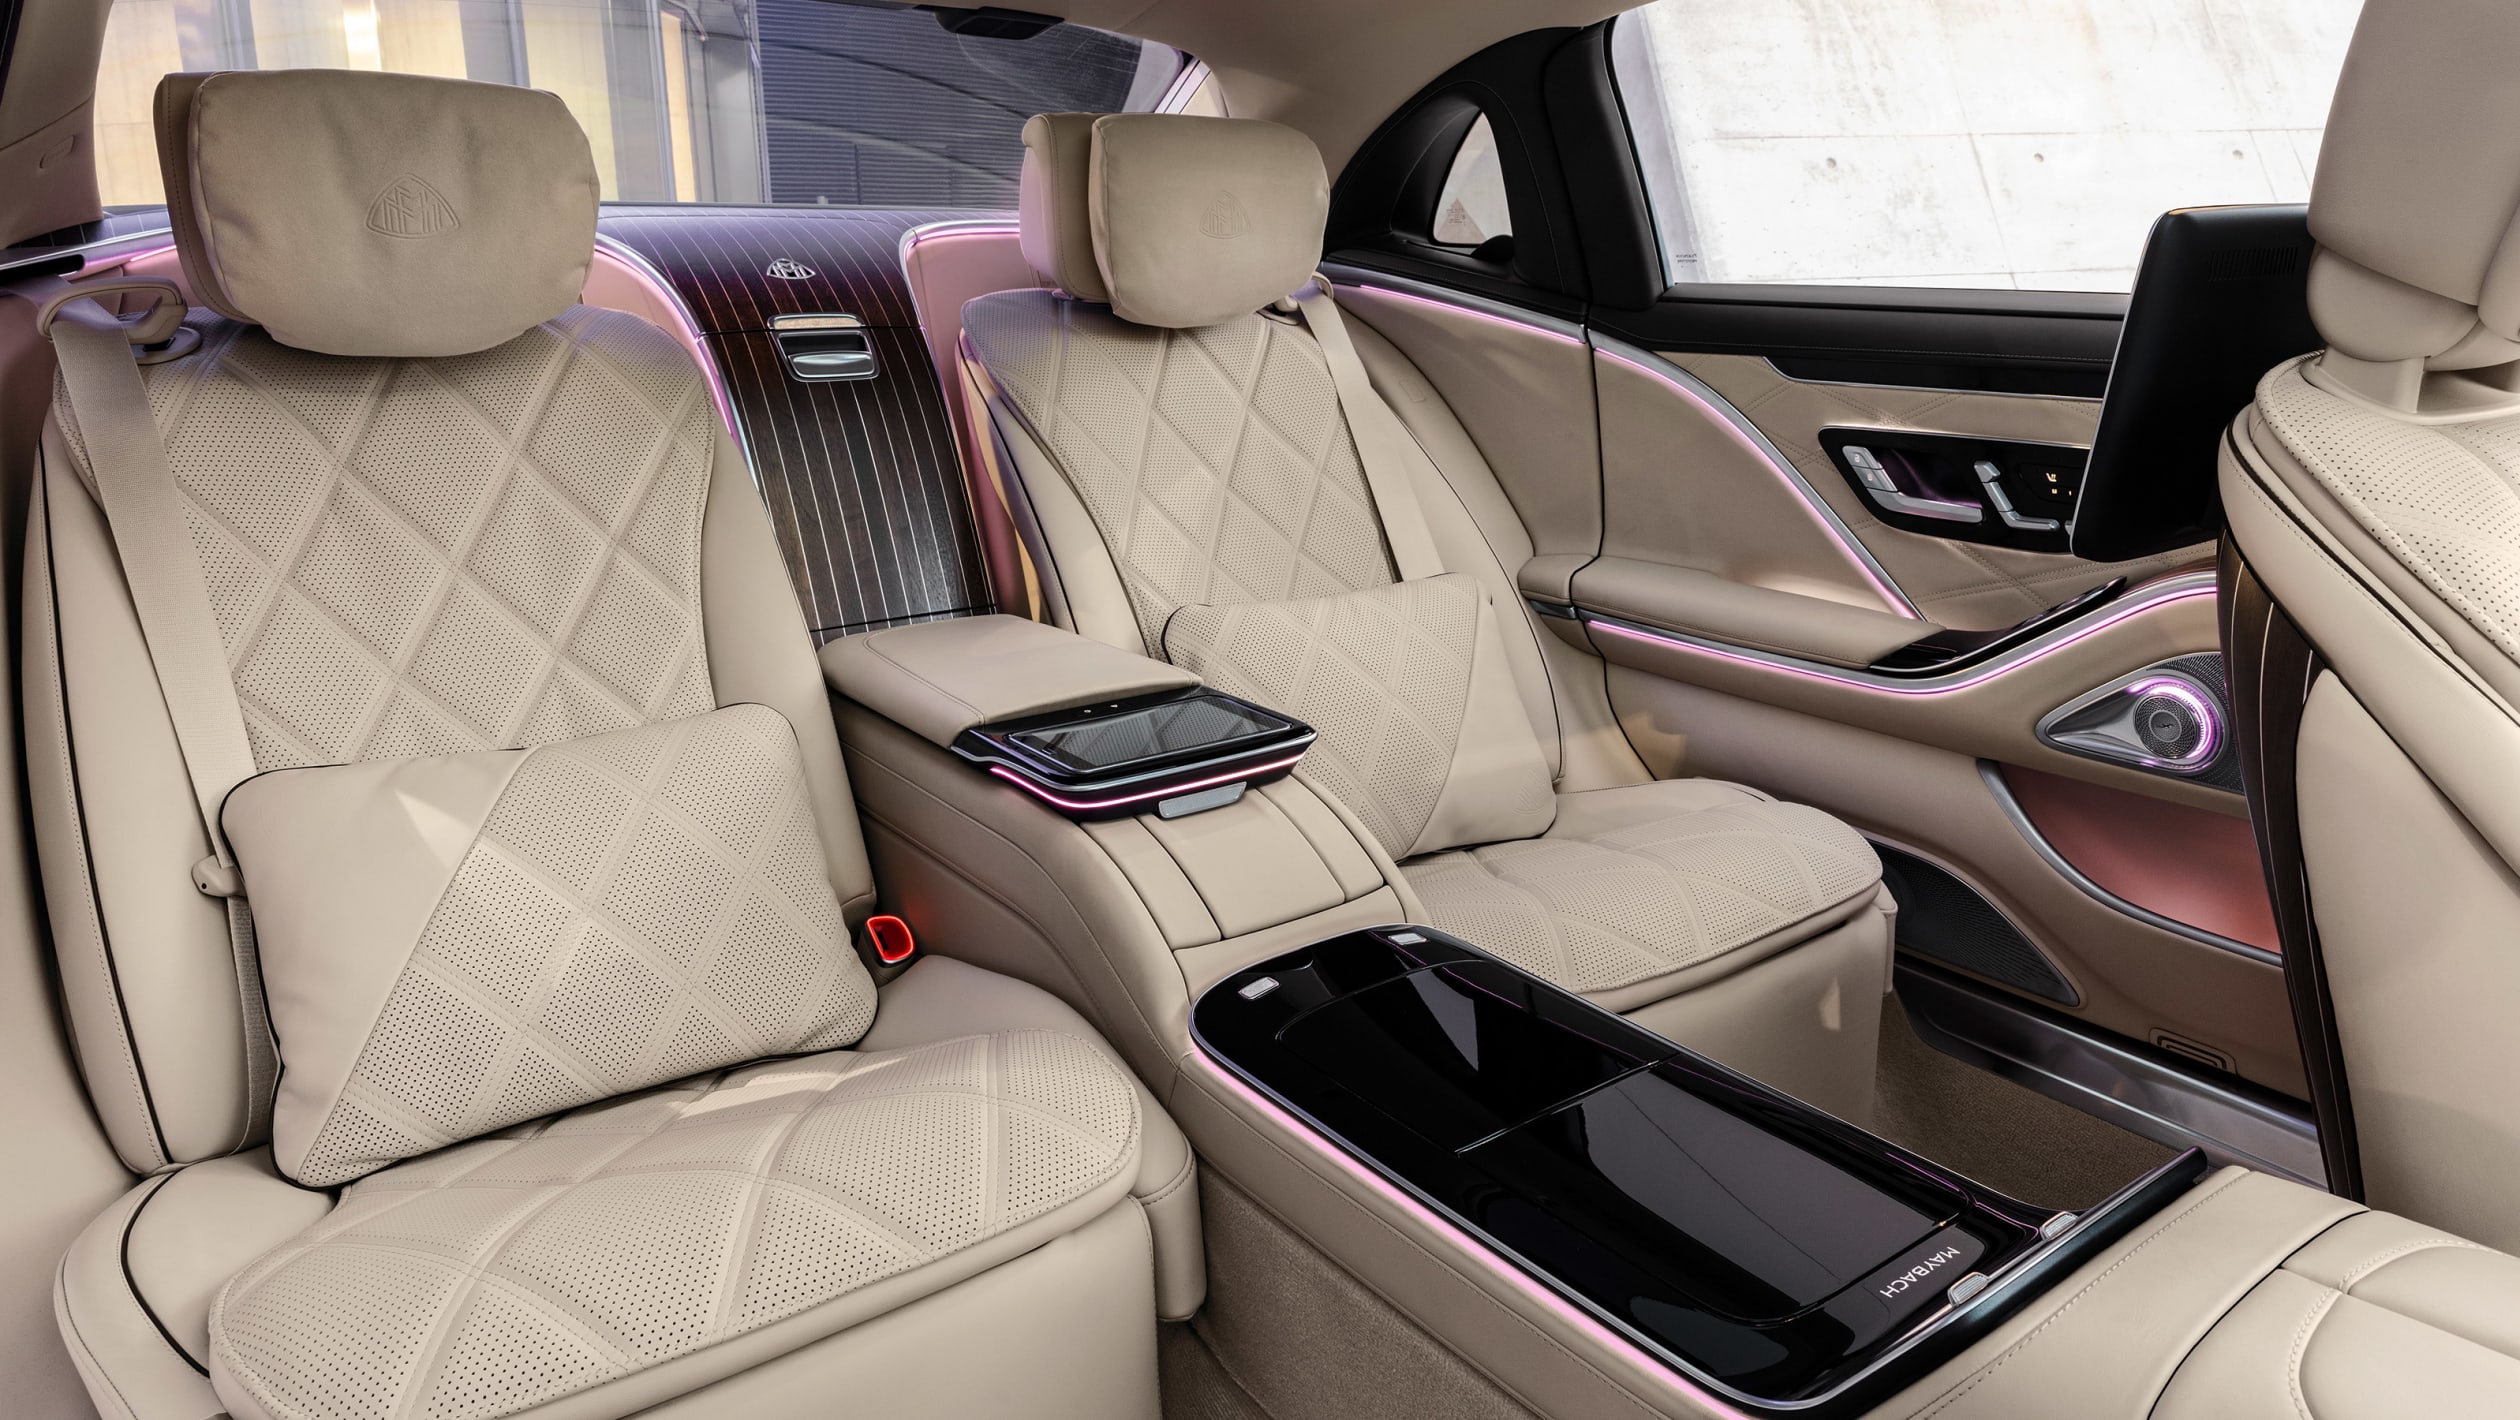 aria-label="New Mercedes Maybach S Class"